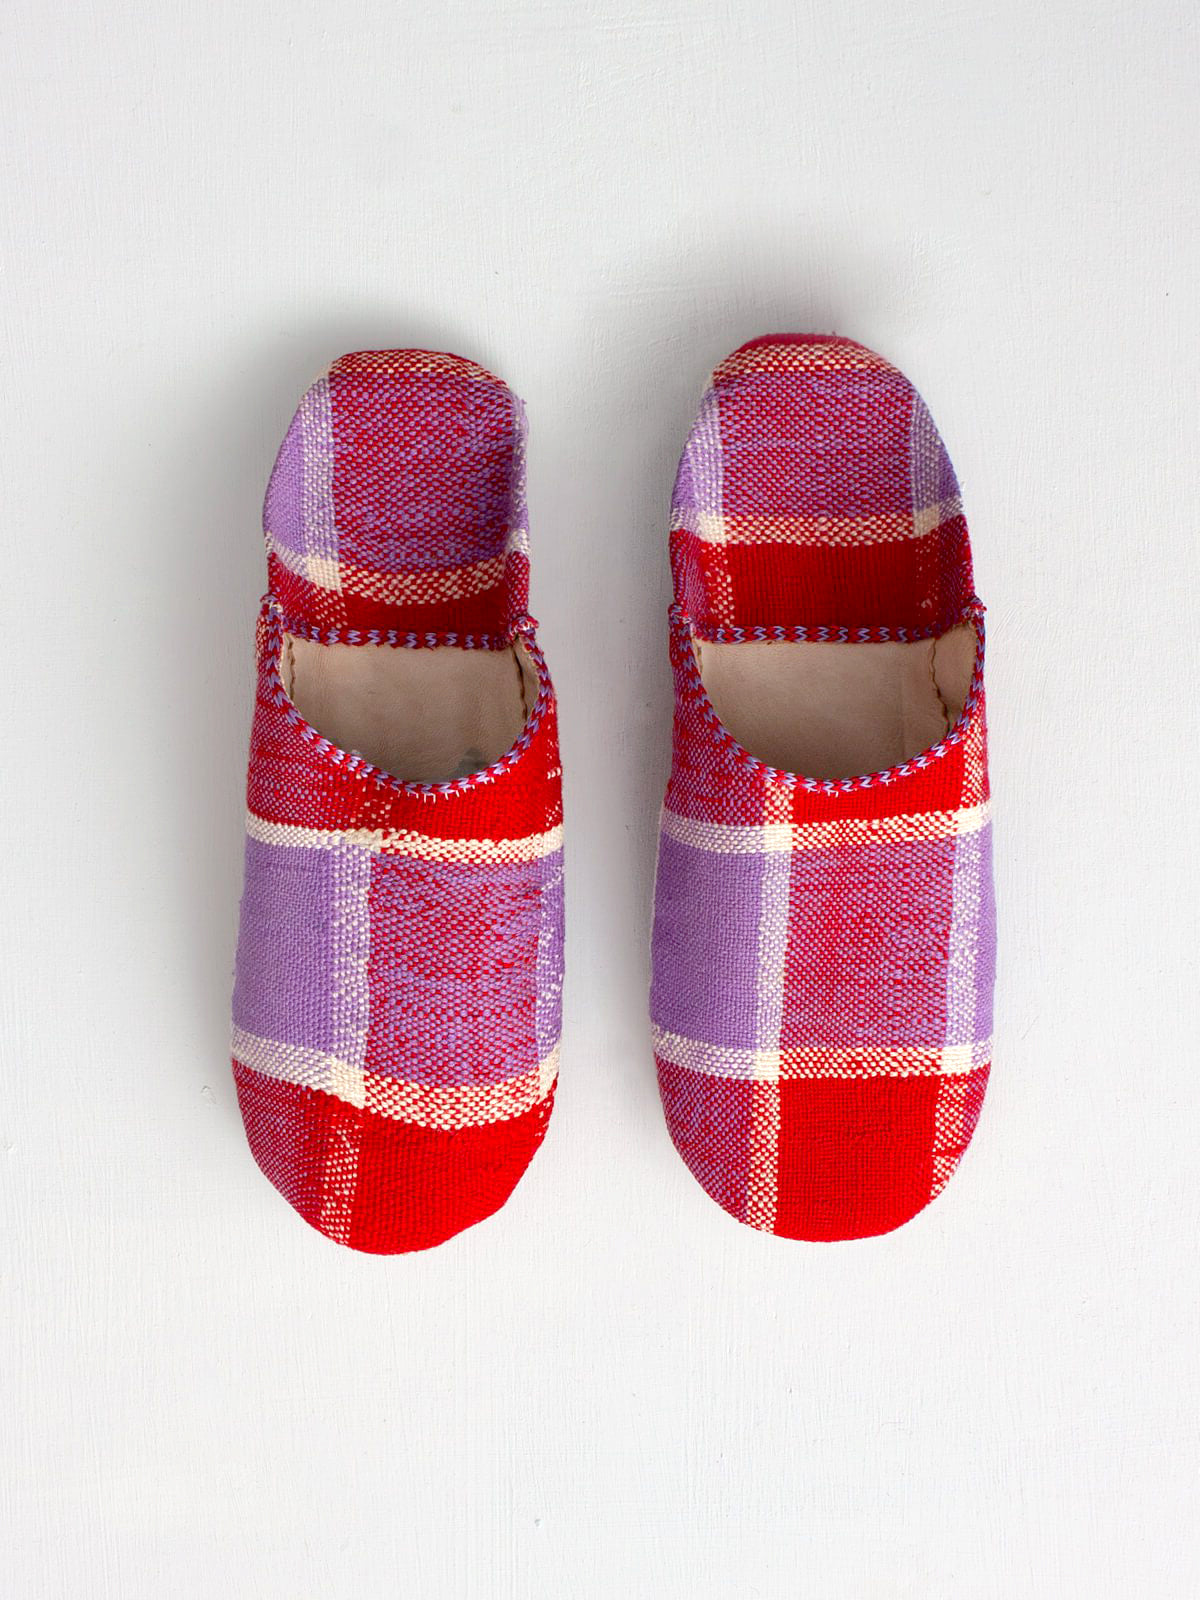 Moroccan Boujad Basic Babouche Slippers, Red and Lilac Check